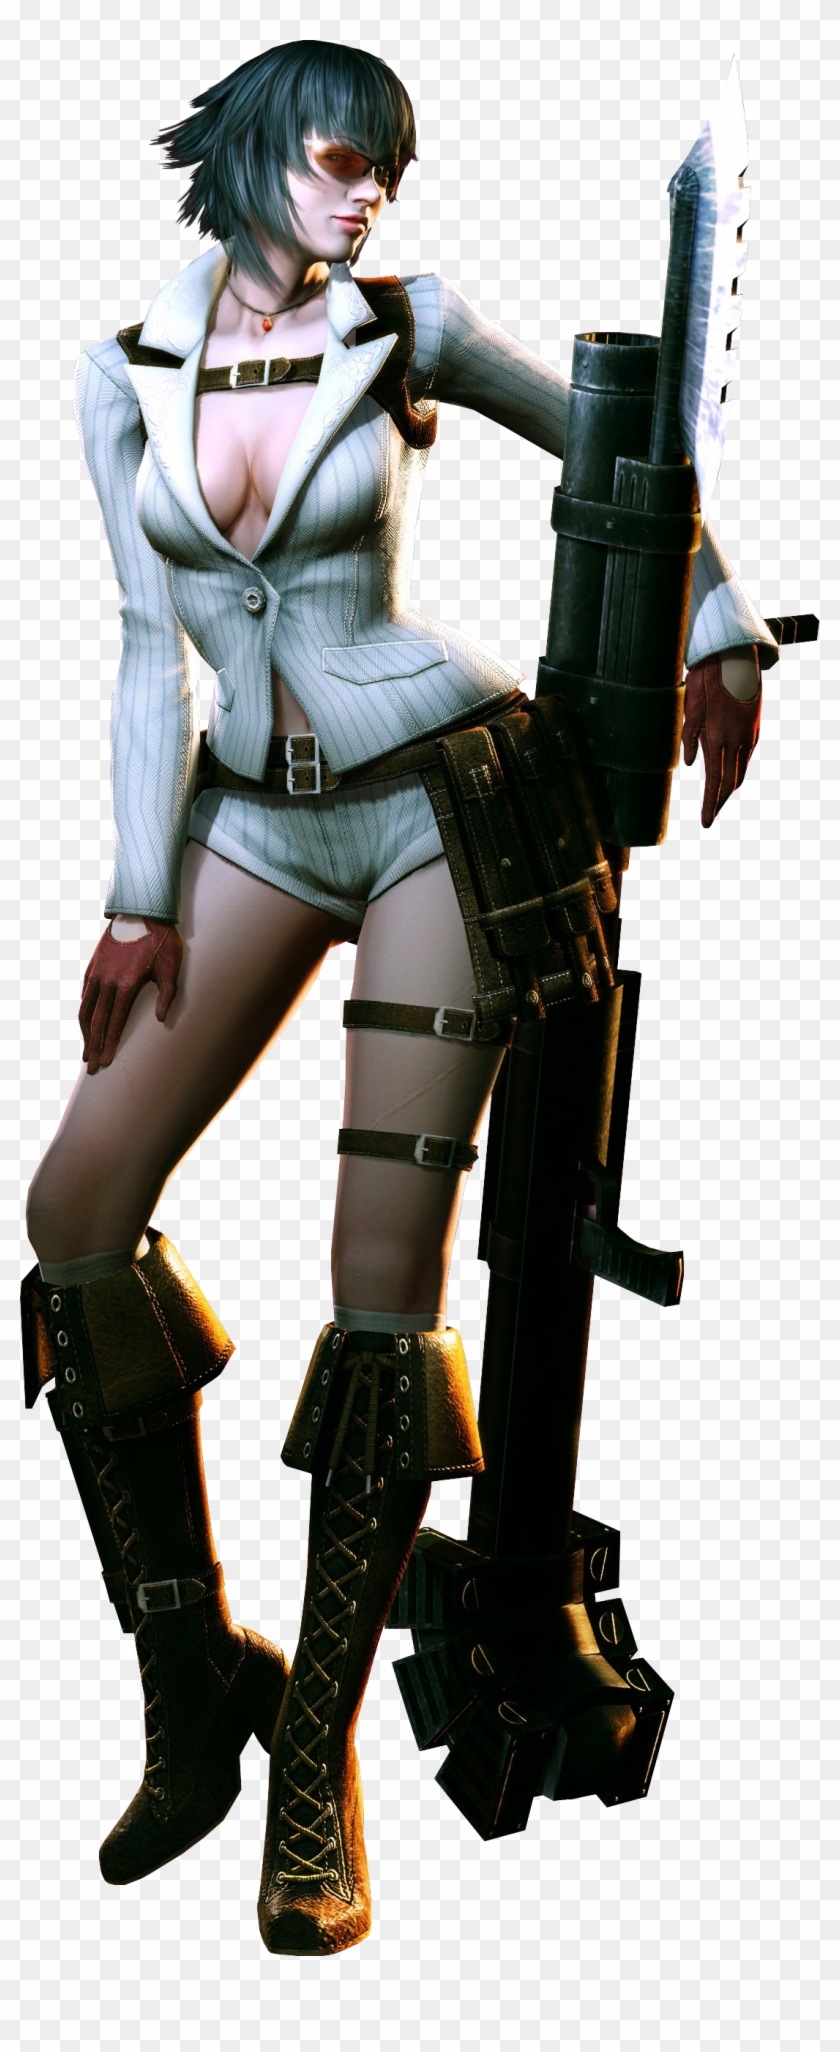 All Her Vulnerability Vanished, And She's No Longer - Devil May Cry Lady Cosplay Clipart #5379514